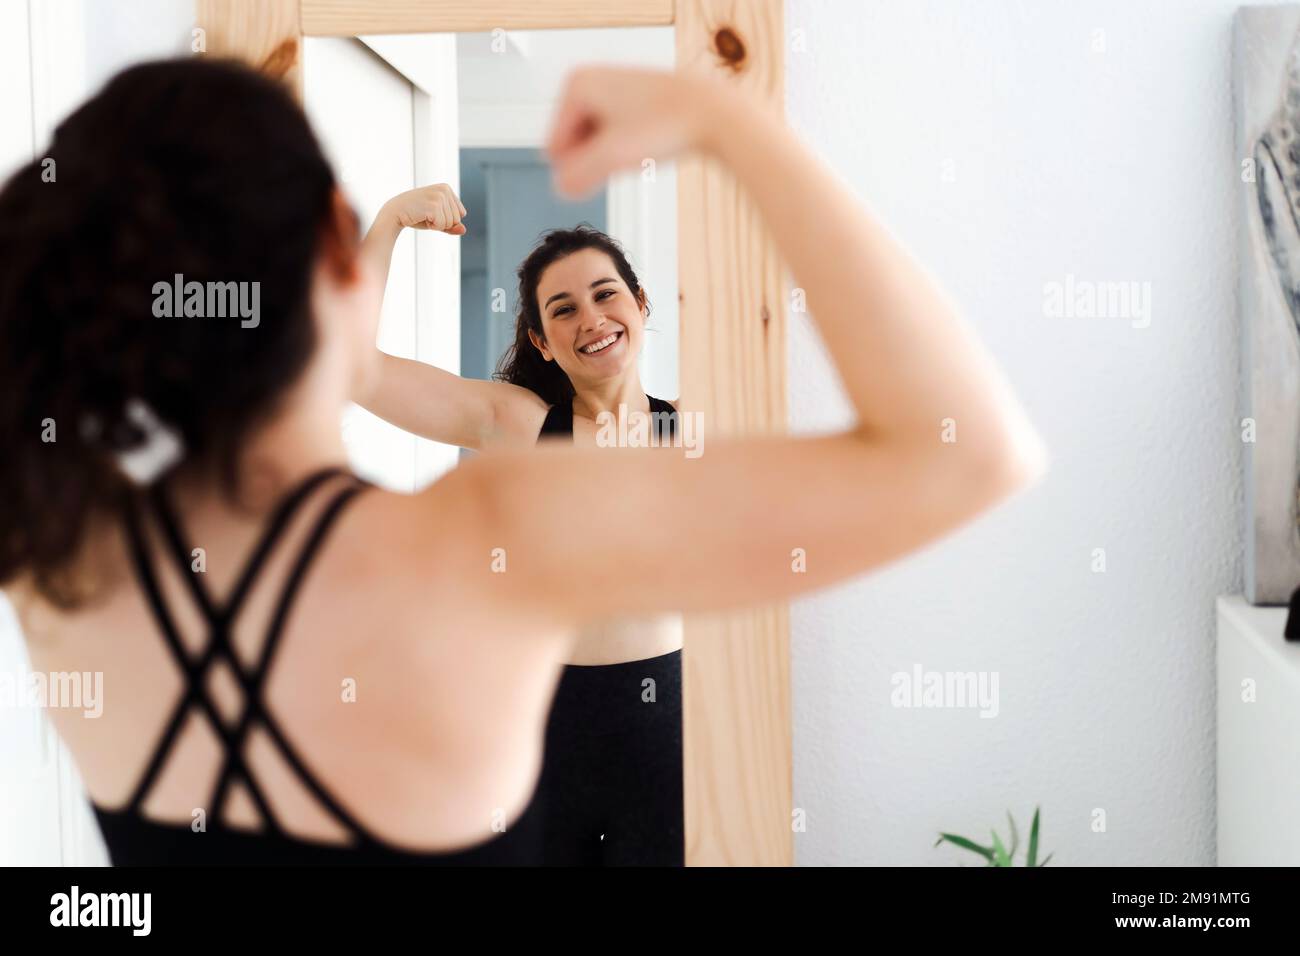 Funny young woman flexing arms looking in the mirror after doing her training Stock Photo